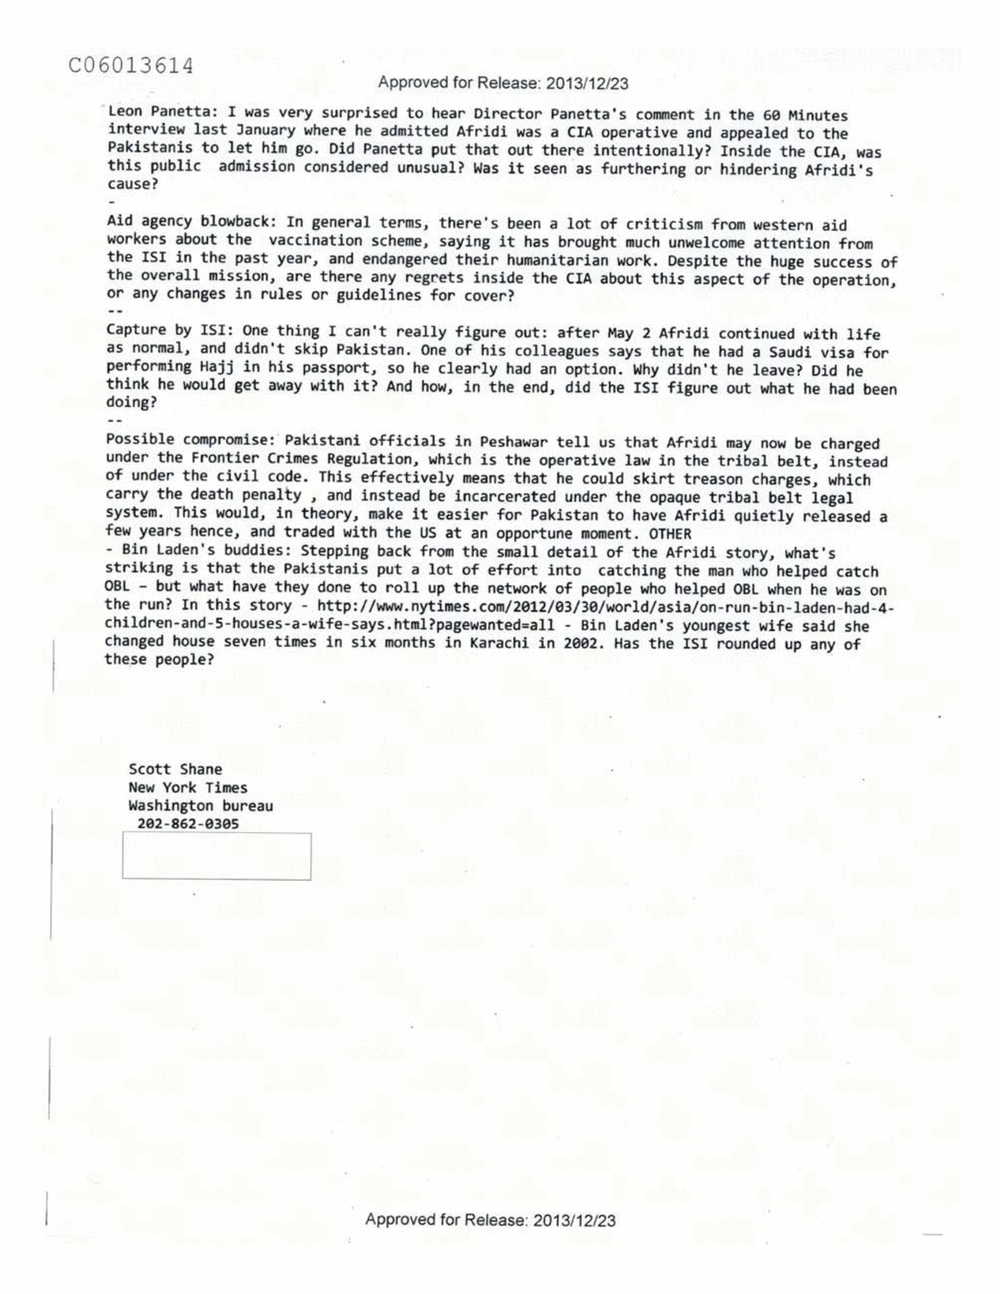 Page 436 from Email Correspondence Between Reporters and CIA Flacks